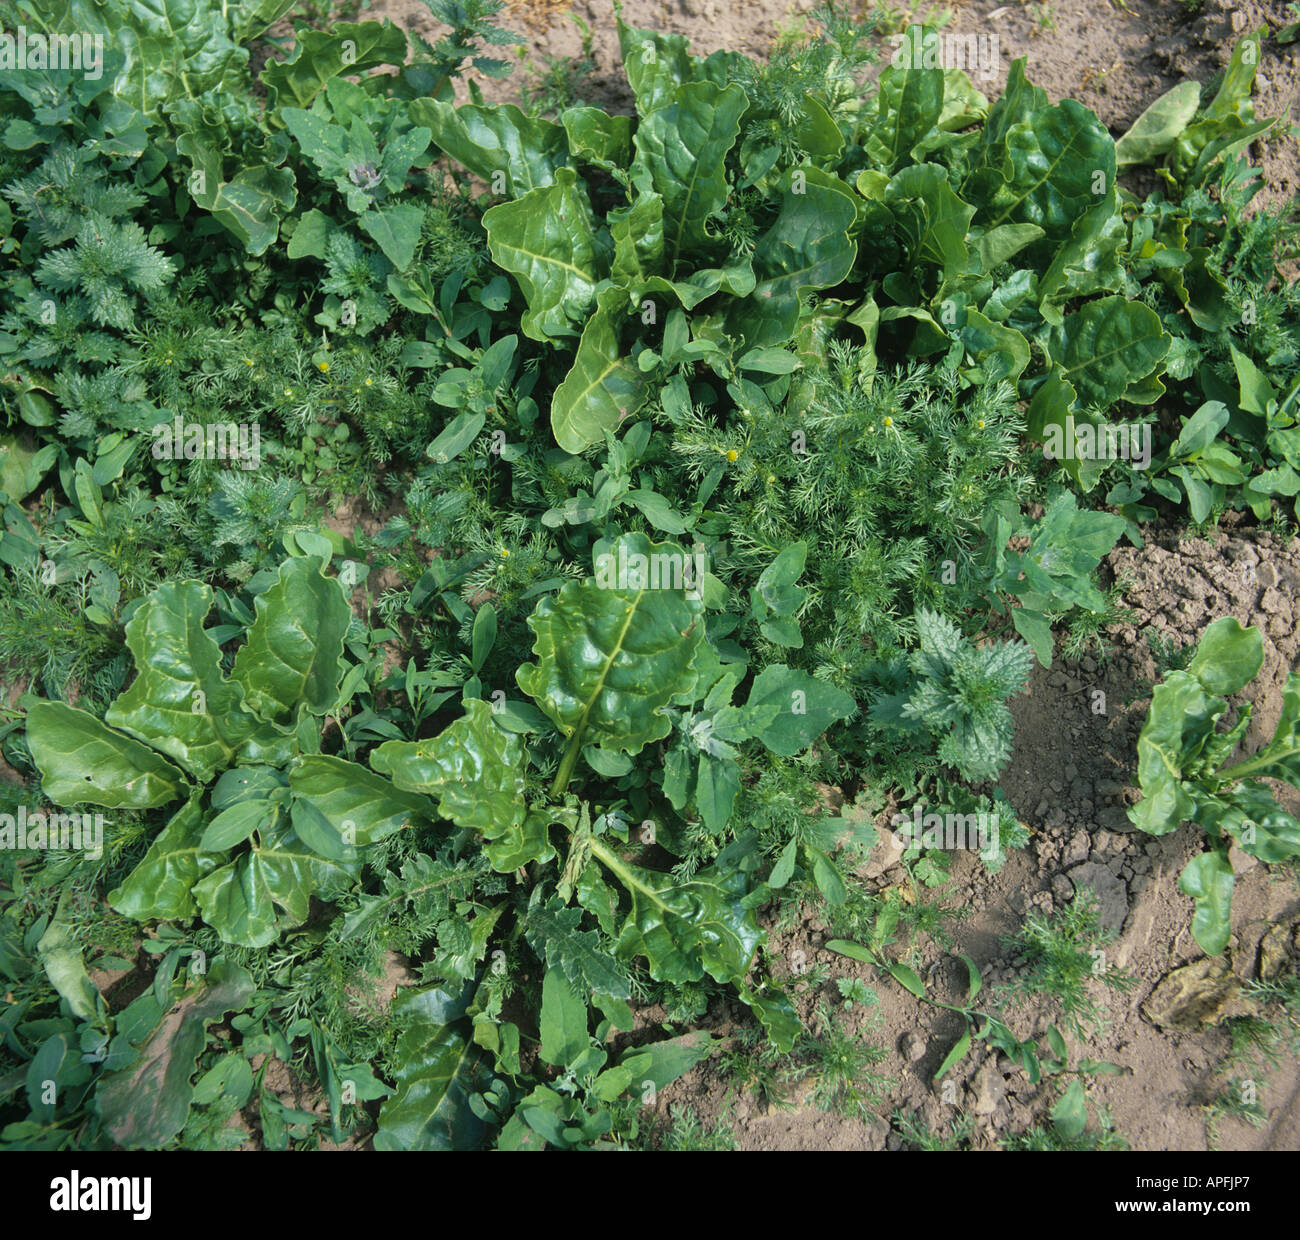 Severe infestation of broad leaved weeds in young sugar beet crop Stock Photo